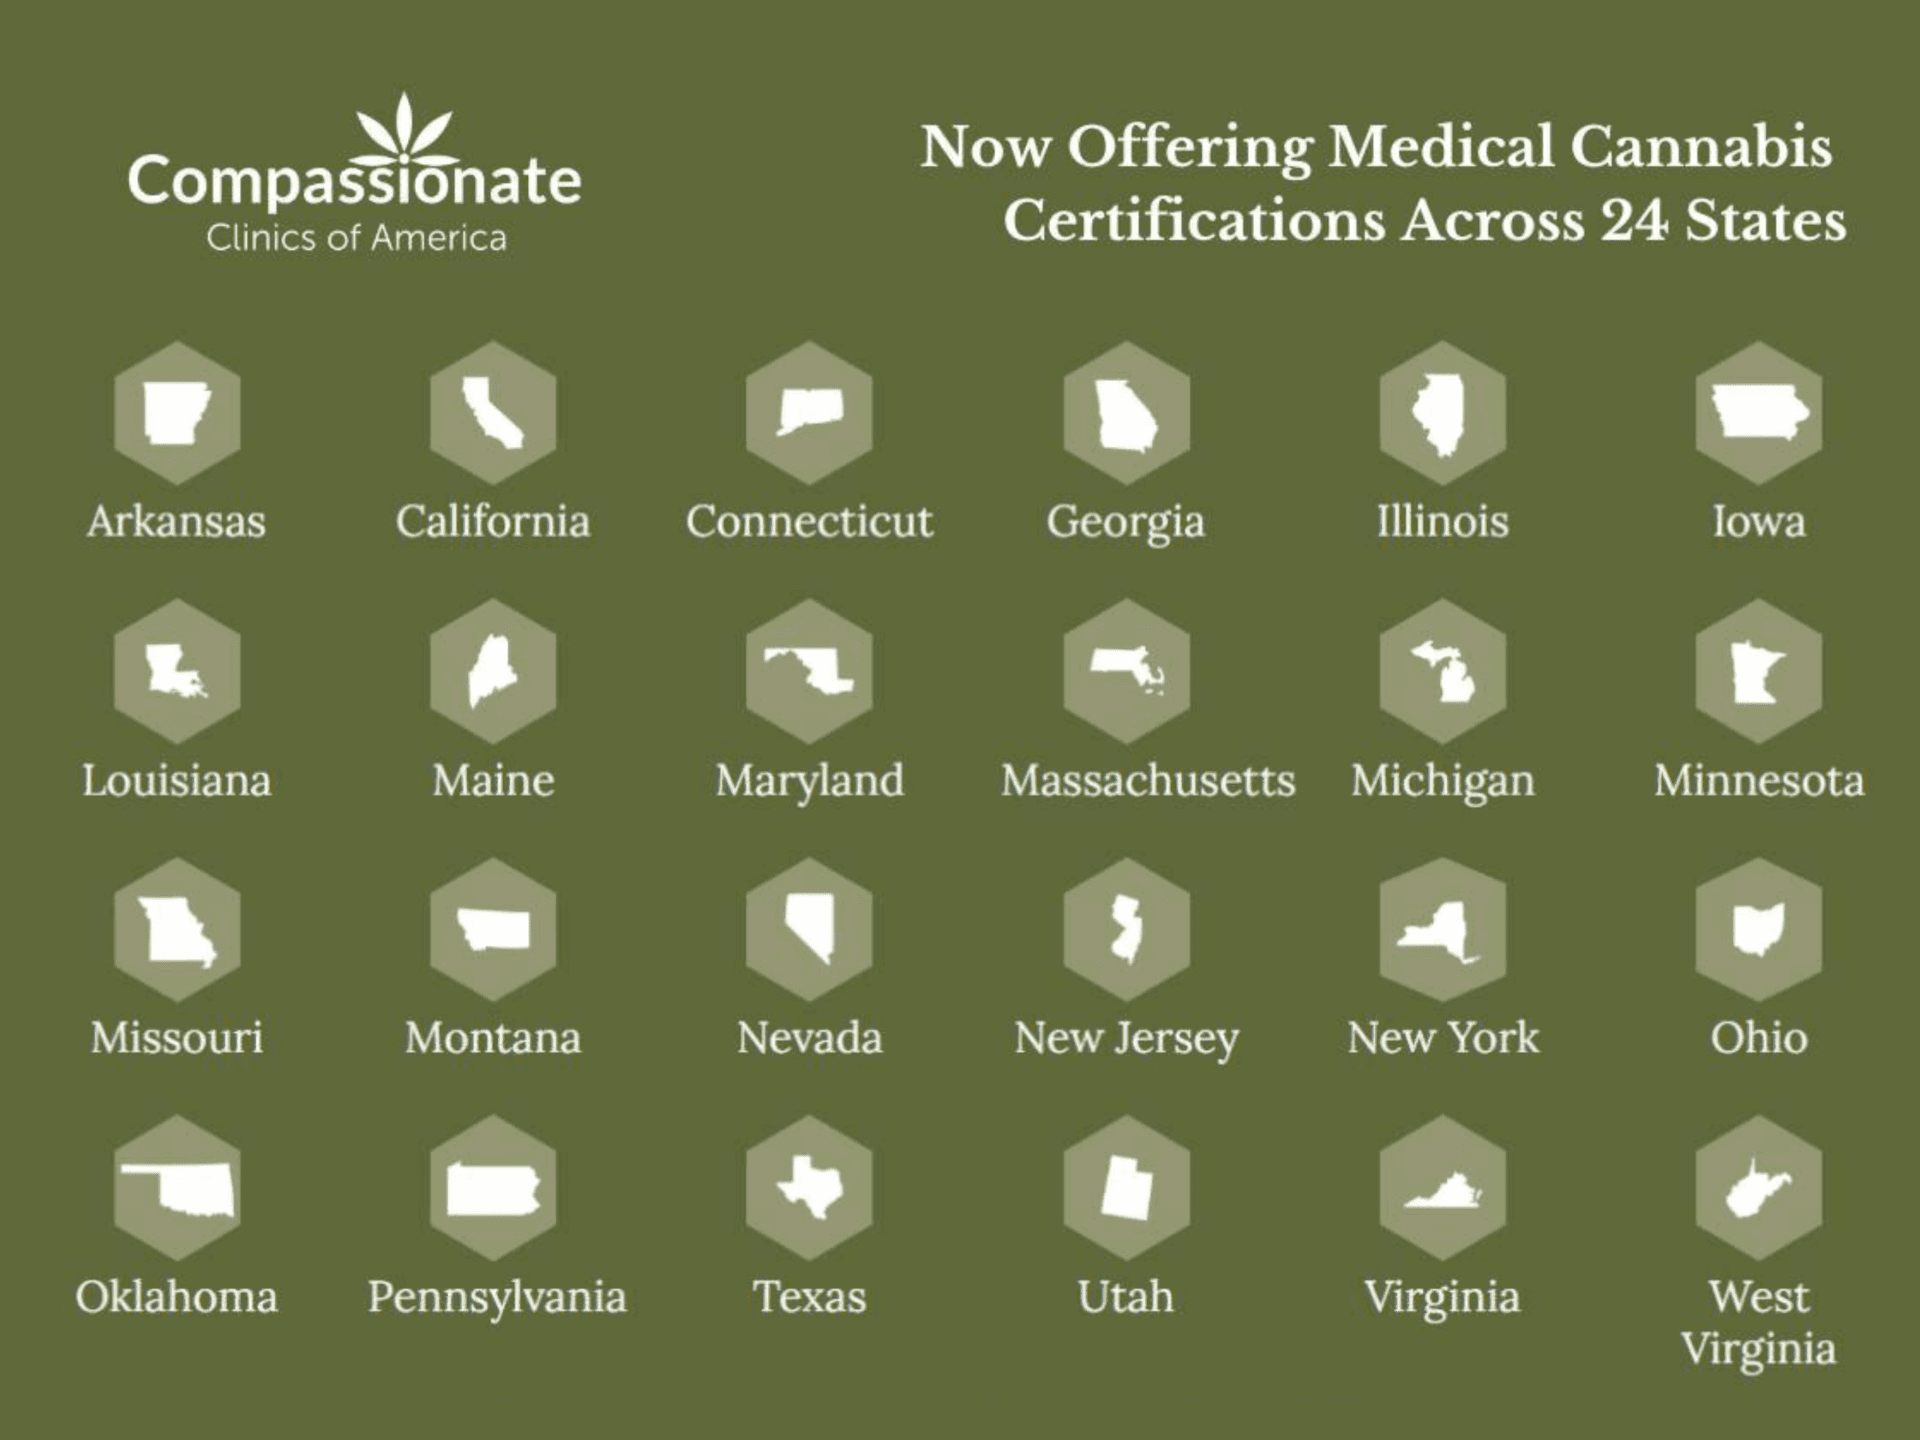 The 24 State shapes are shown that Compassionate Clinics of America provides medical cannabis certification.